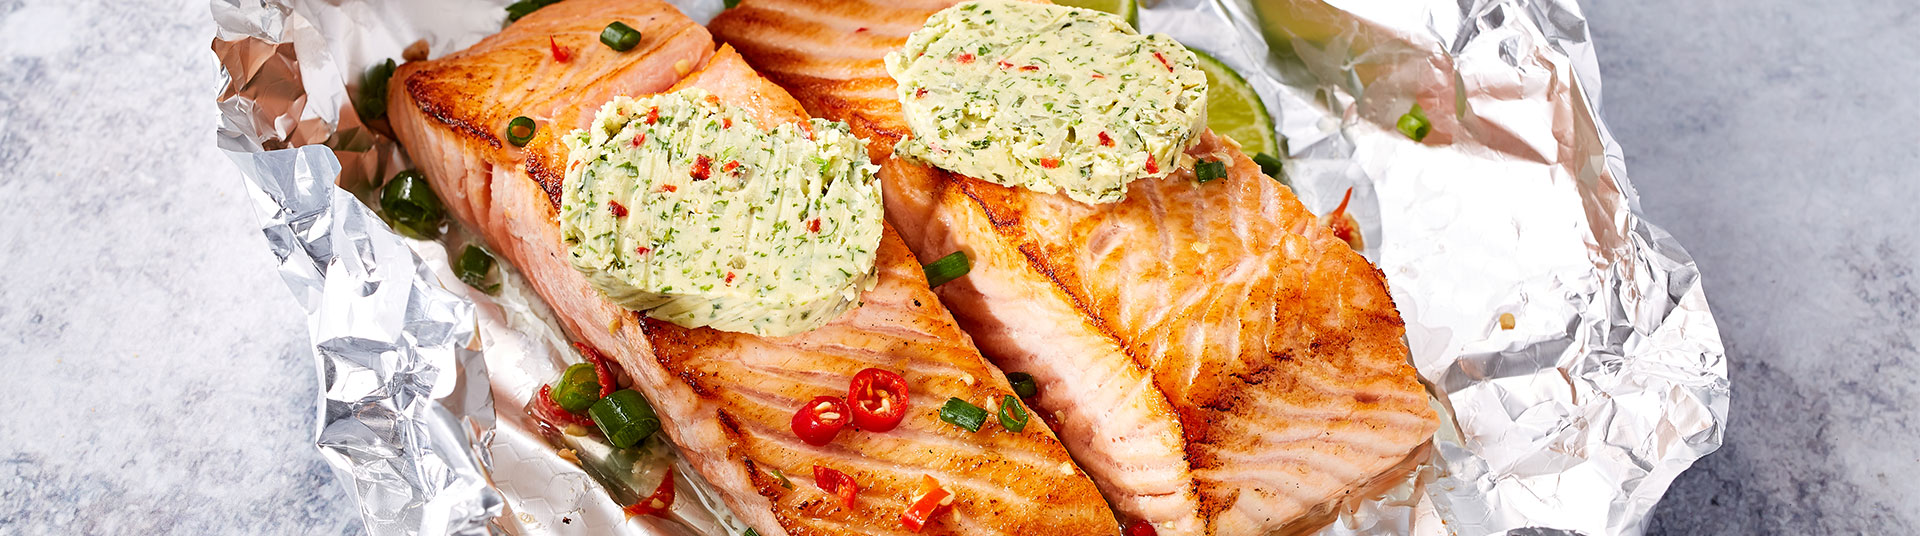 Thai-Infused Butter Baked Salmon Recipe